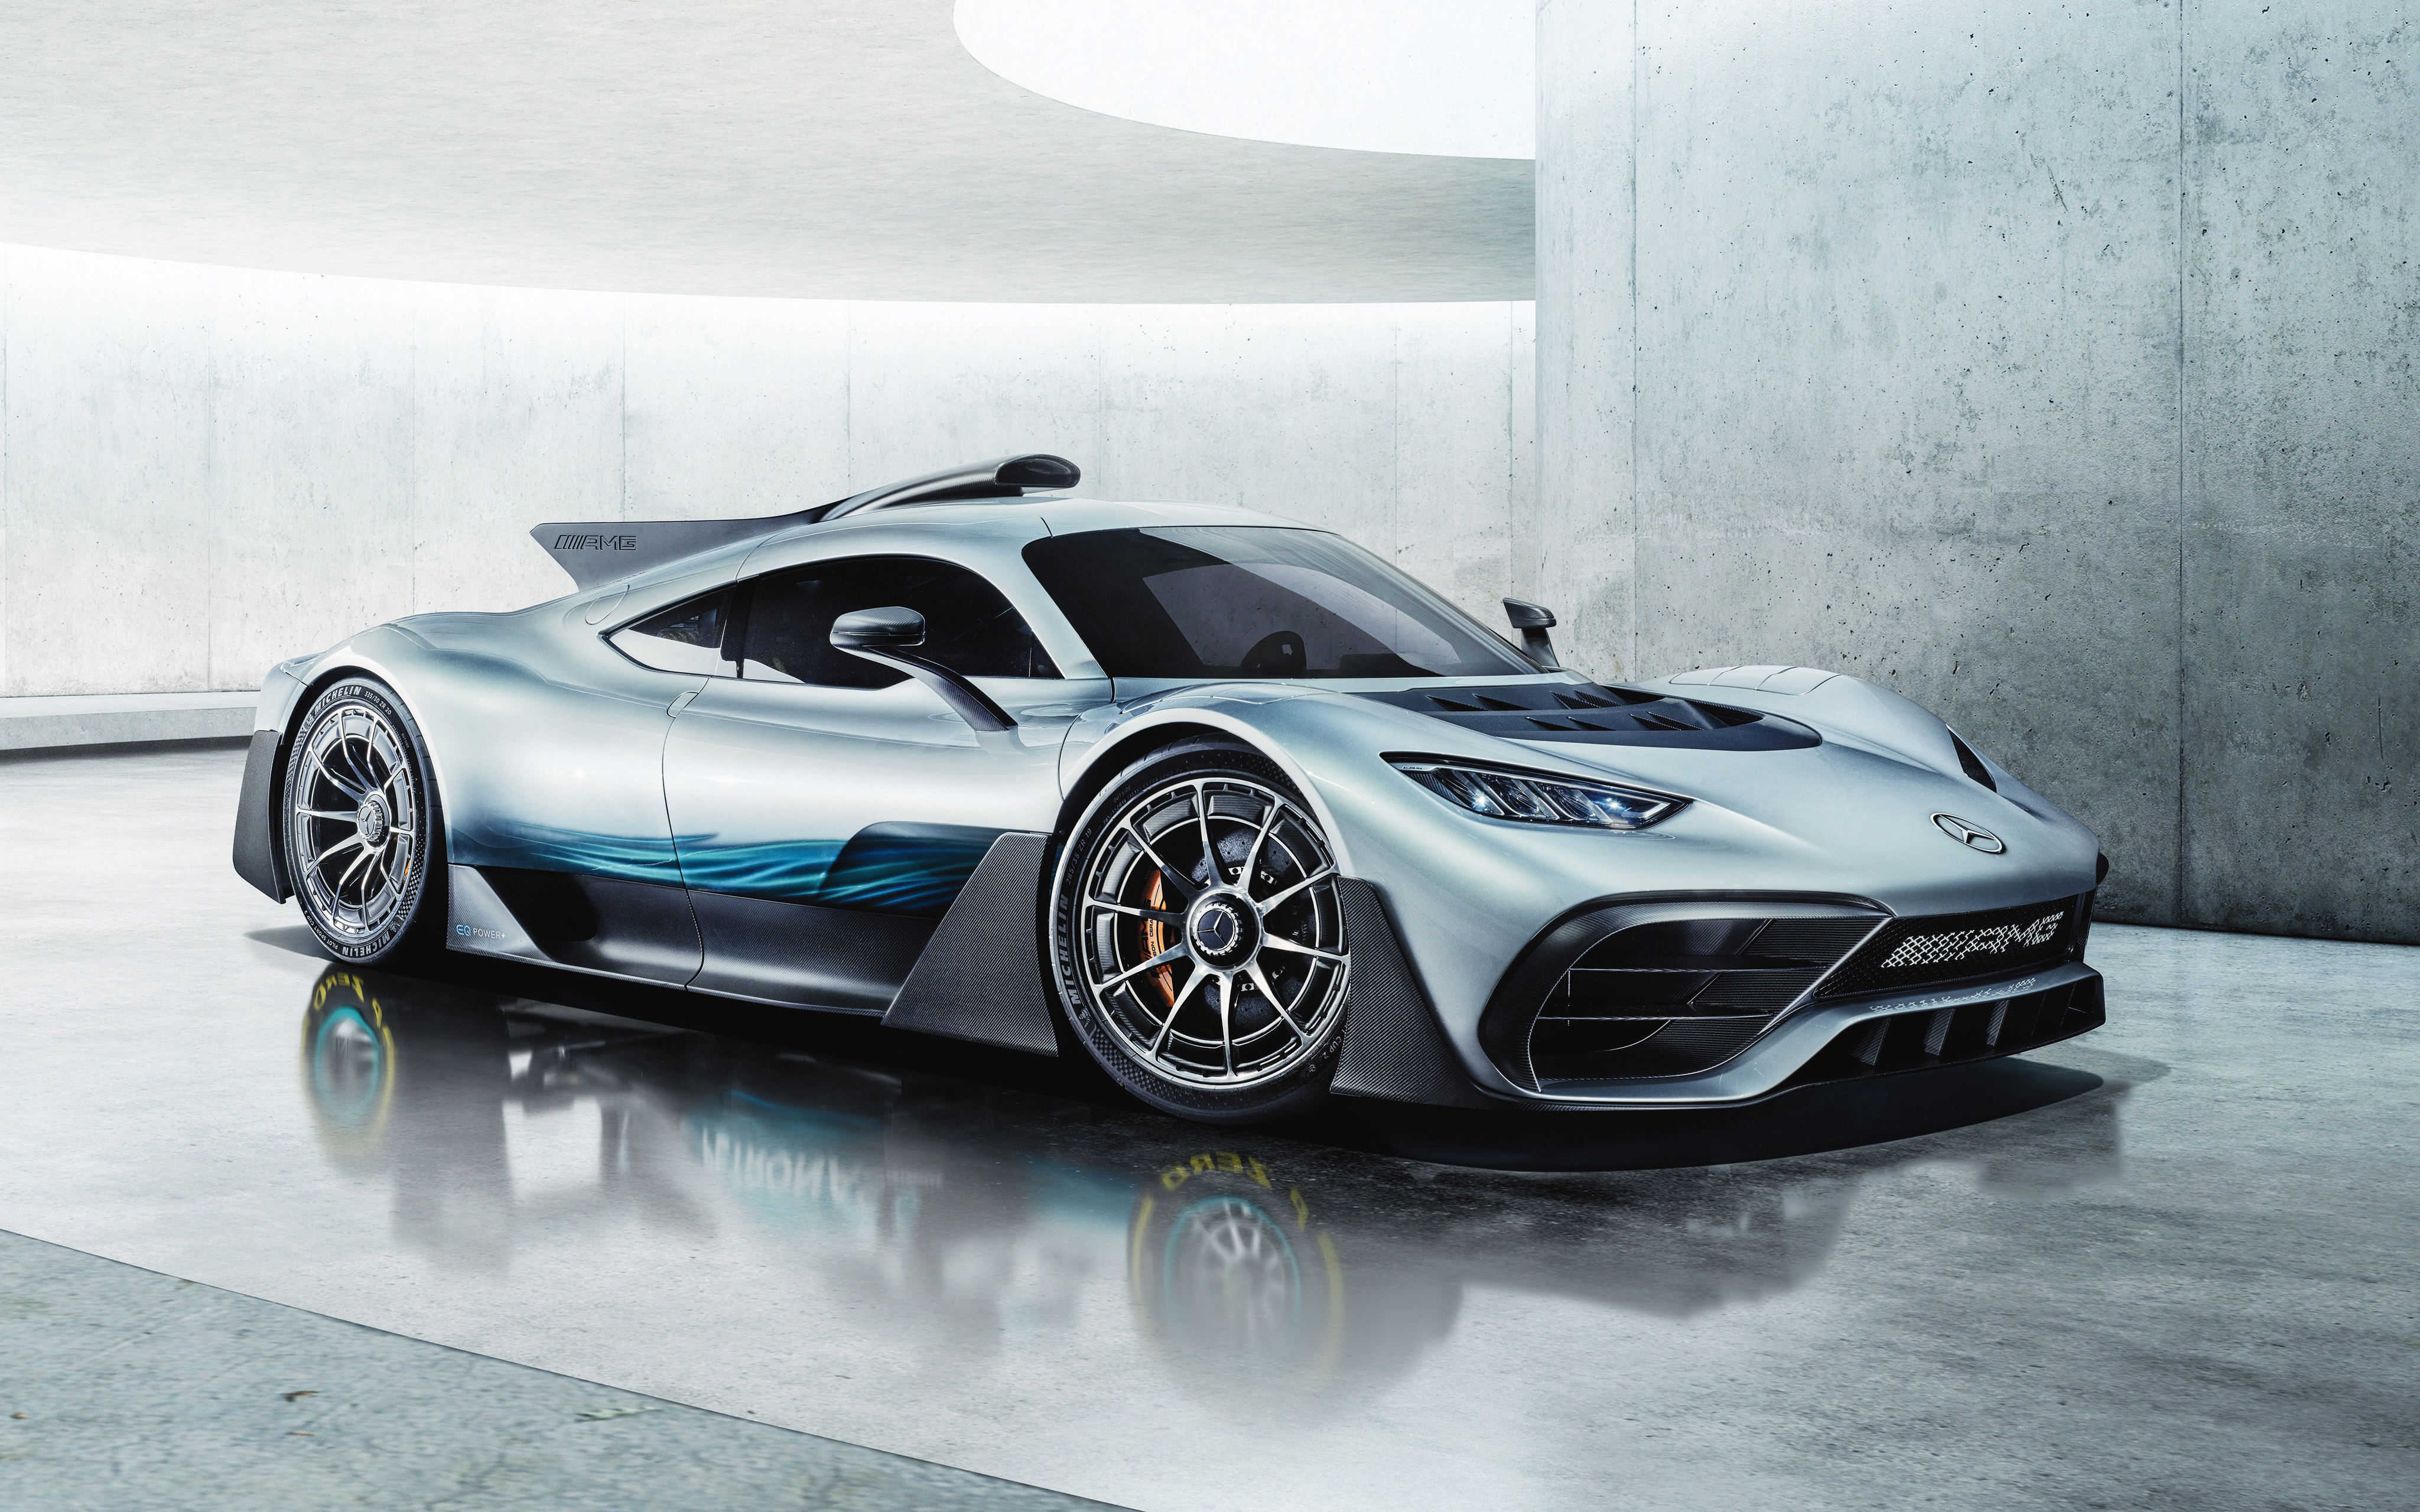 Mercedes AMG Project One 2019 4K4300511375 - Mercedes AMG Project One 2019 4K - Project, Pista, One, Mercedes, AMG, 2019